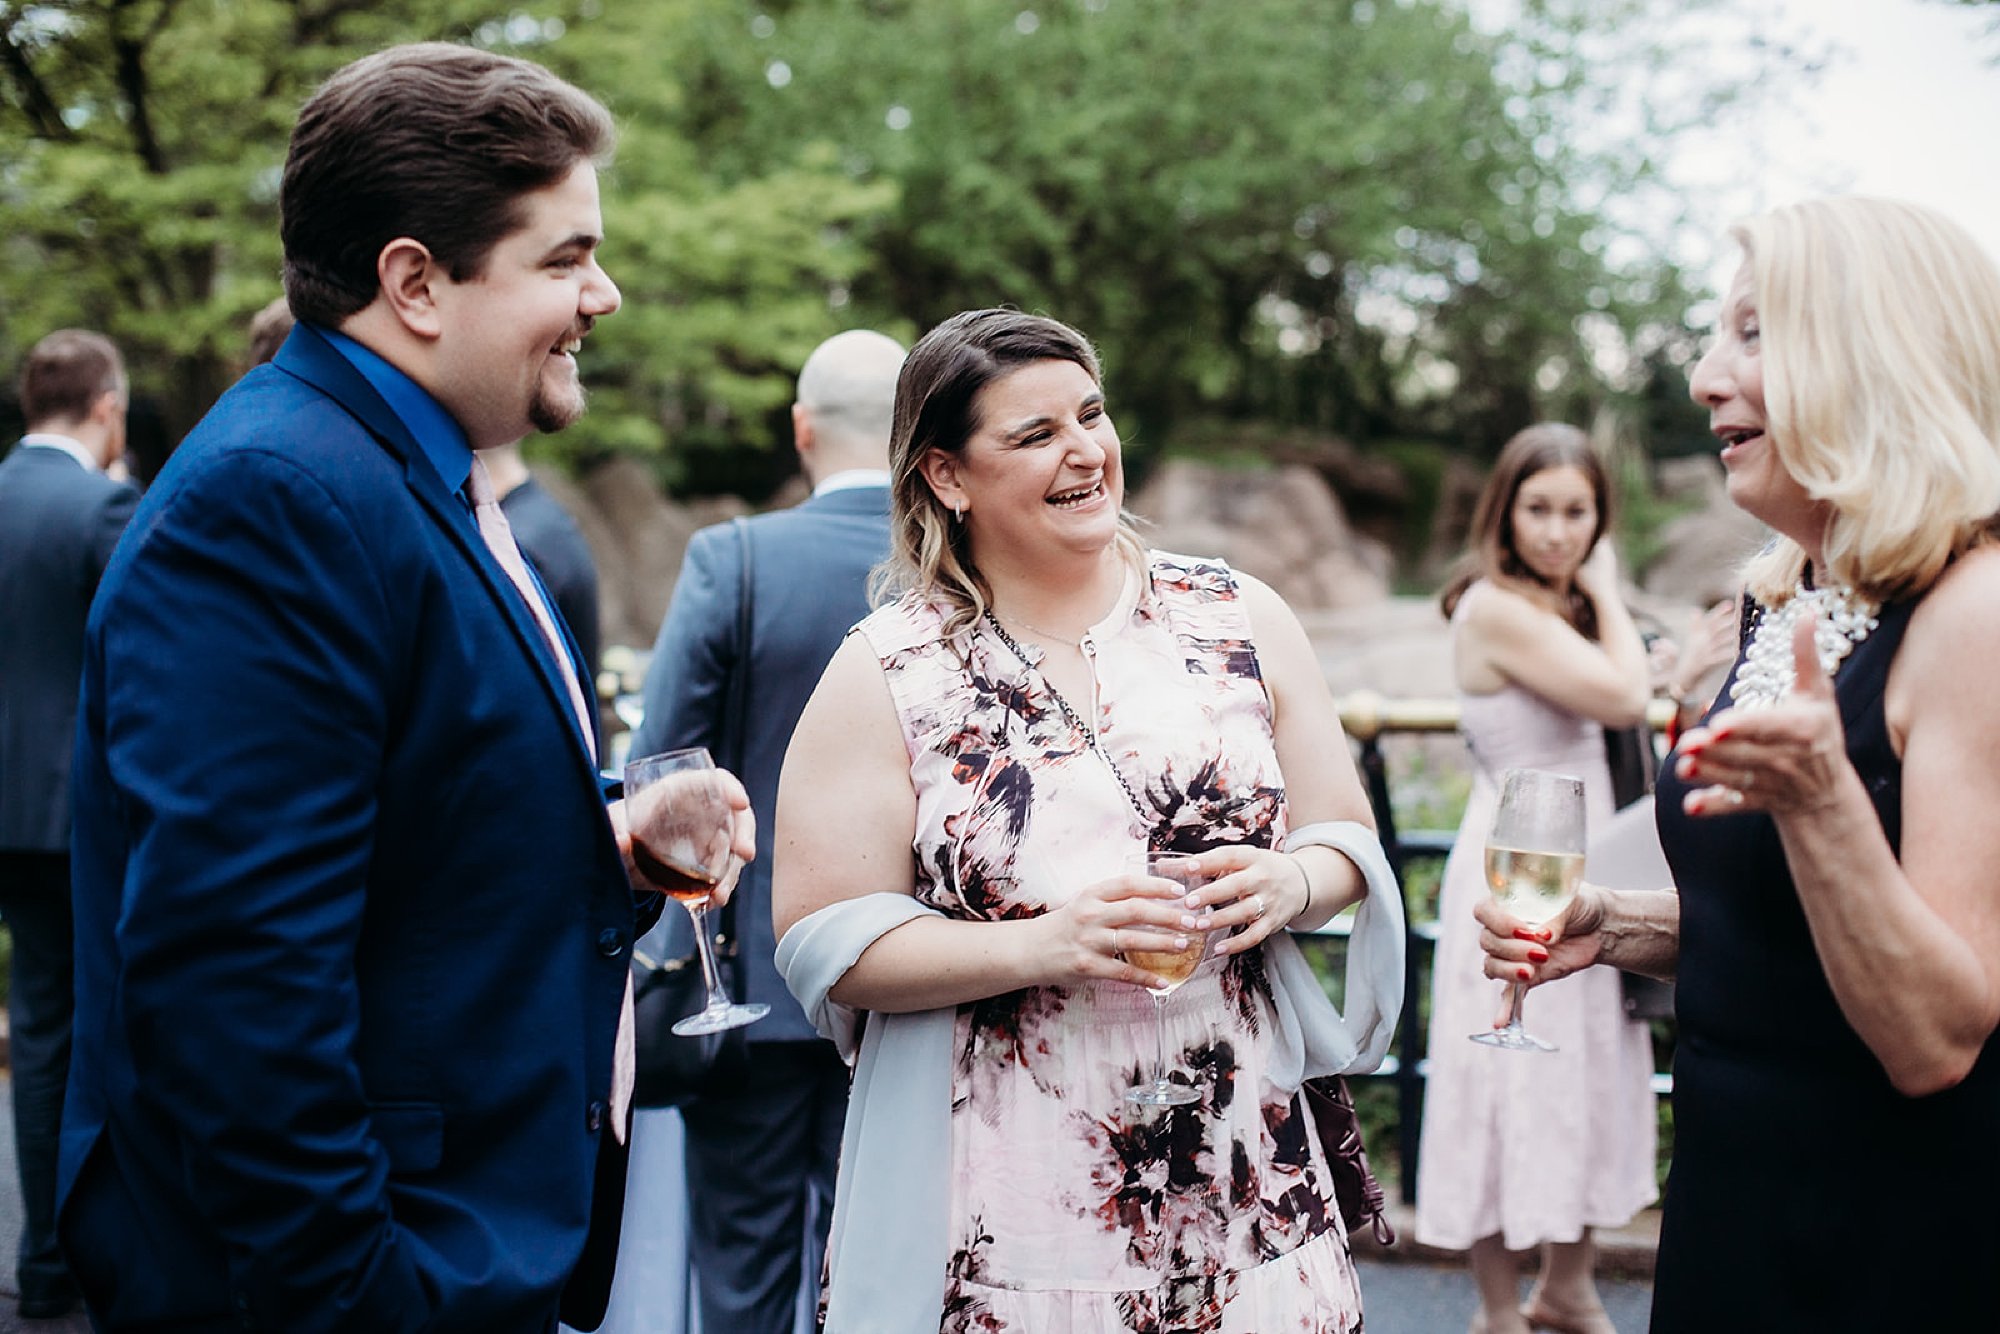 guests mingle during cocktail hour at The Bronx Zoo wedding reception